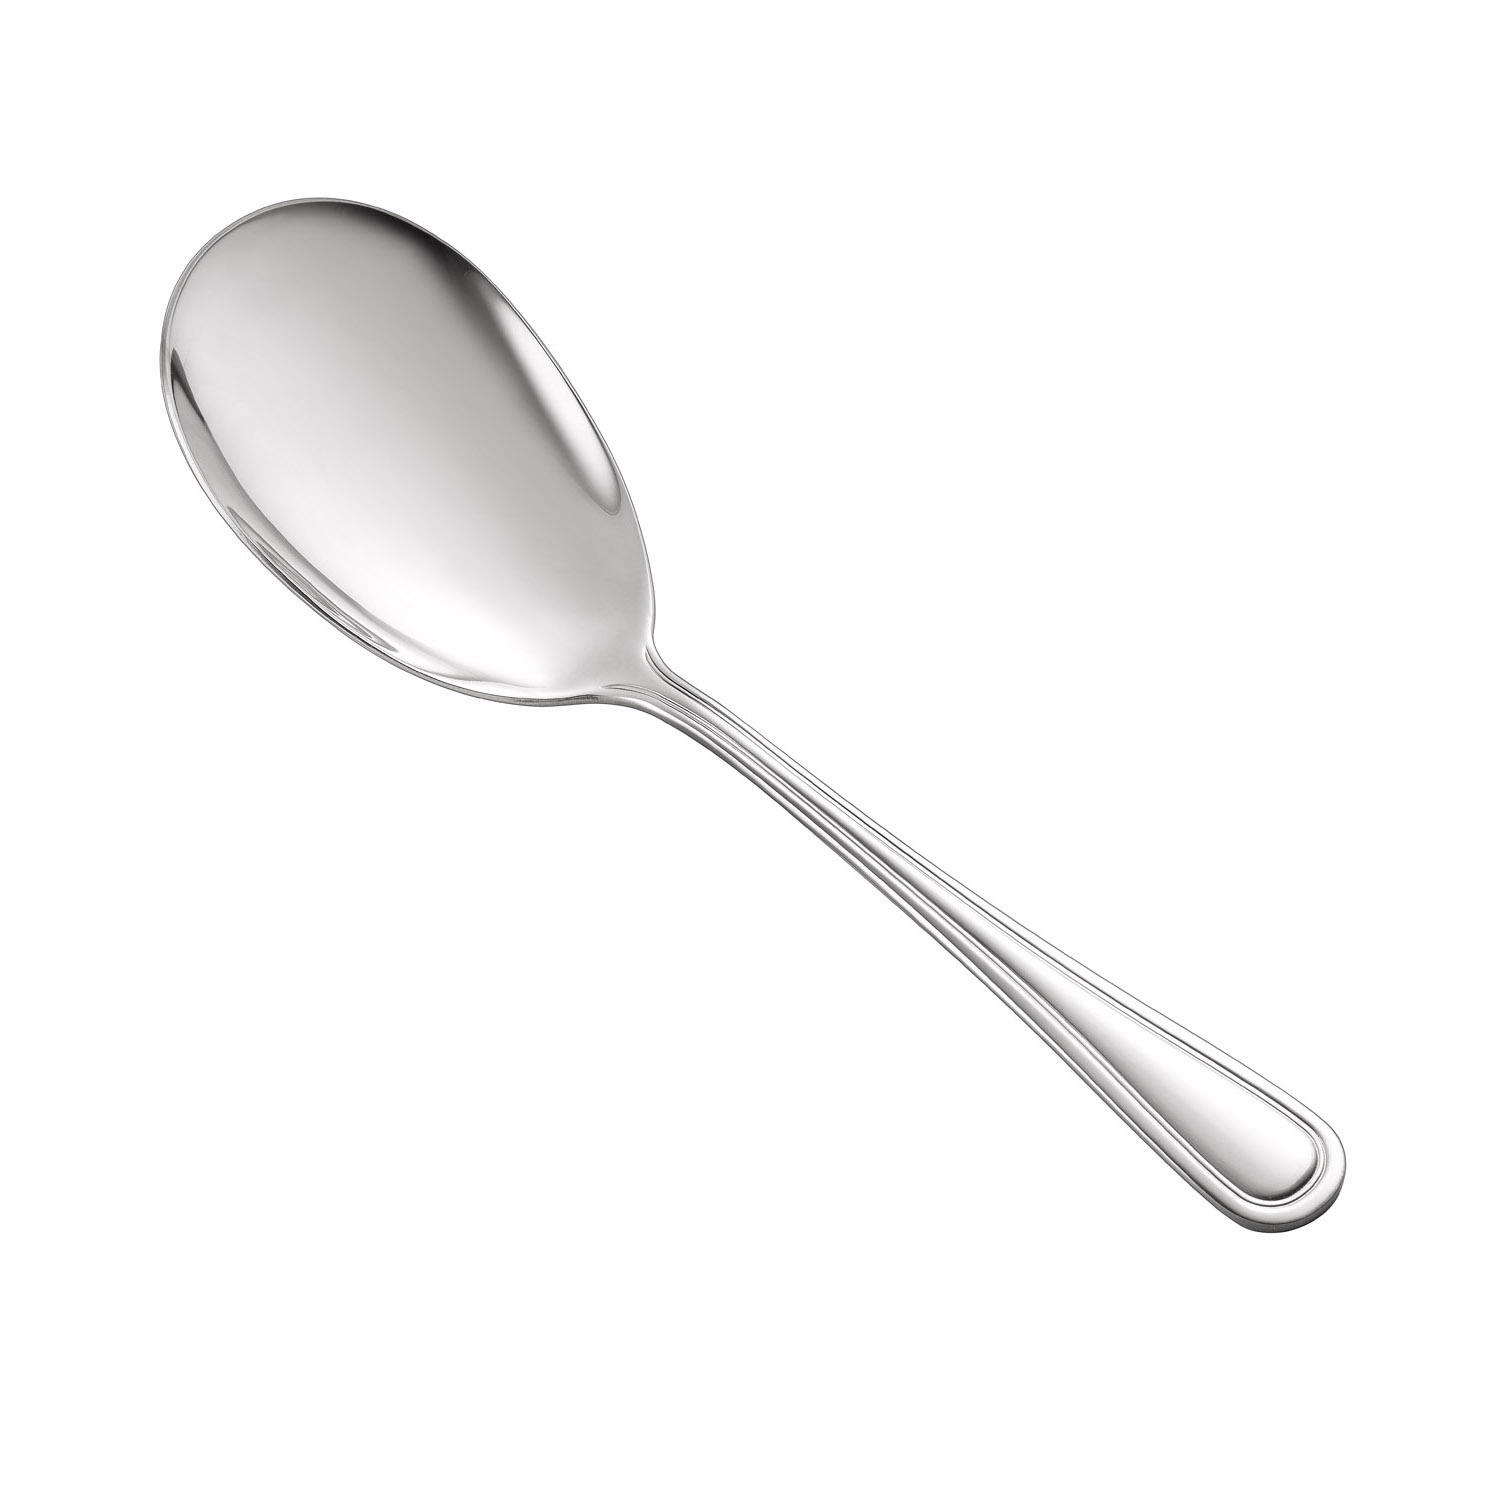 CAC China 8002-17 Elite Solid Spoon, Extra Heavyweight 18/8, 9"